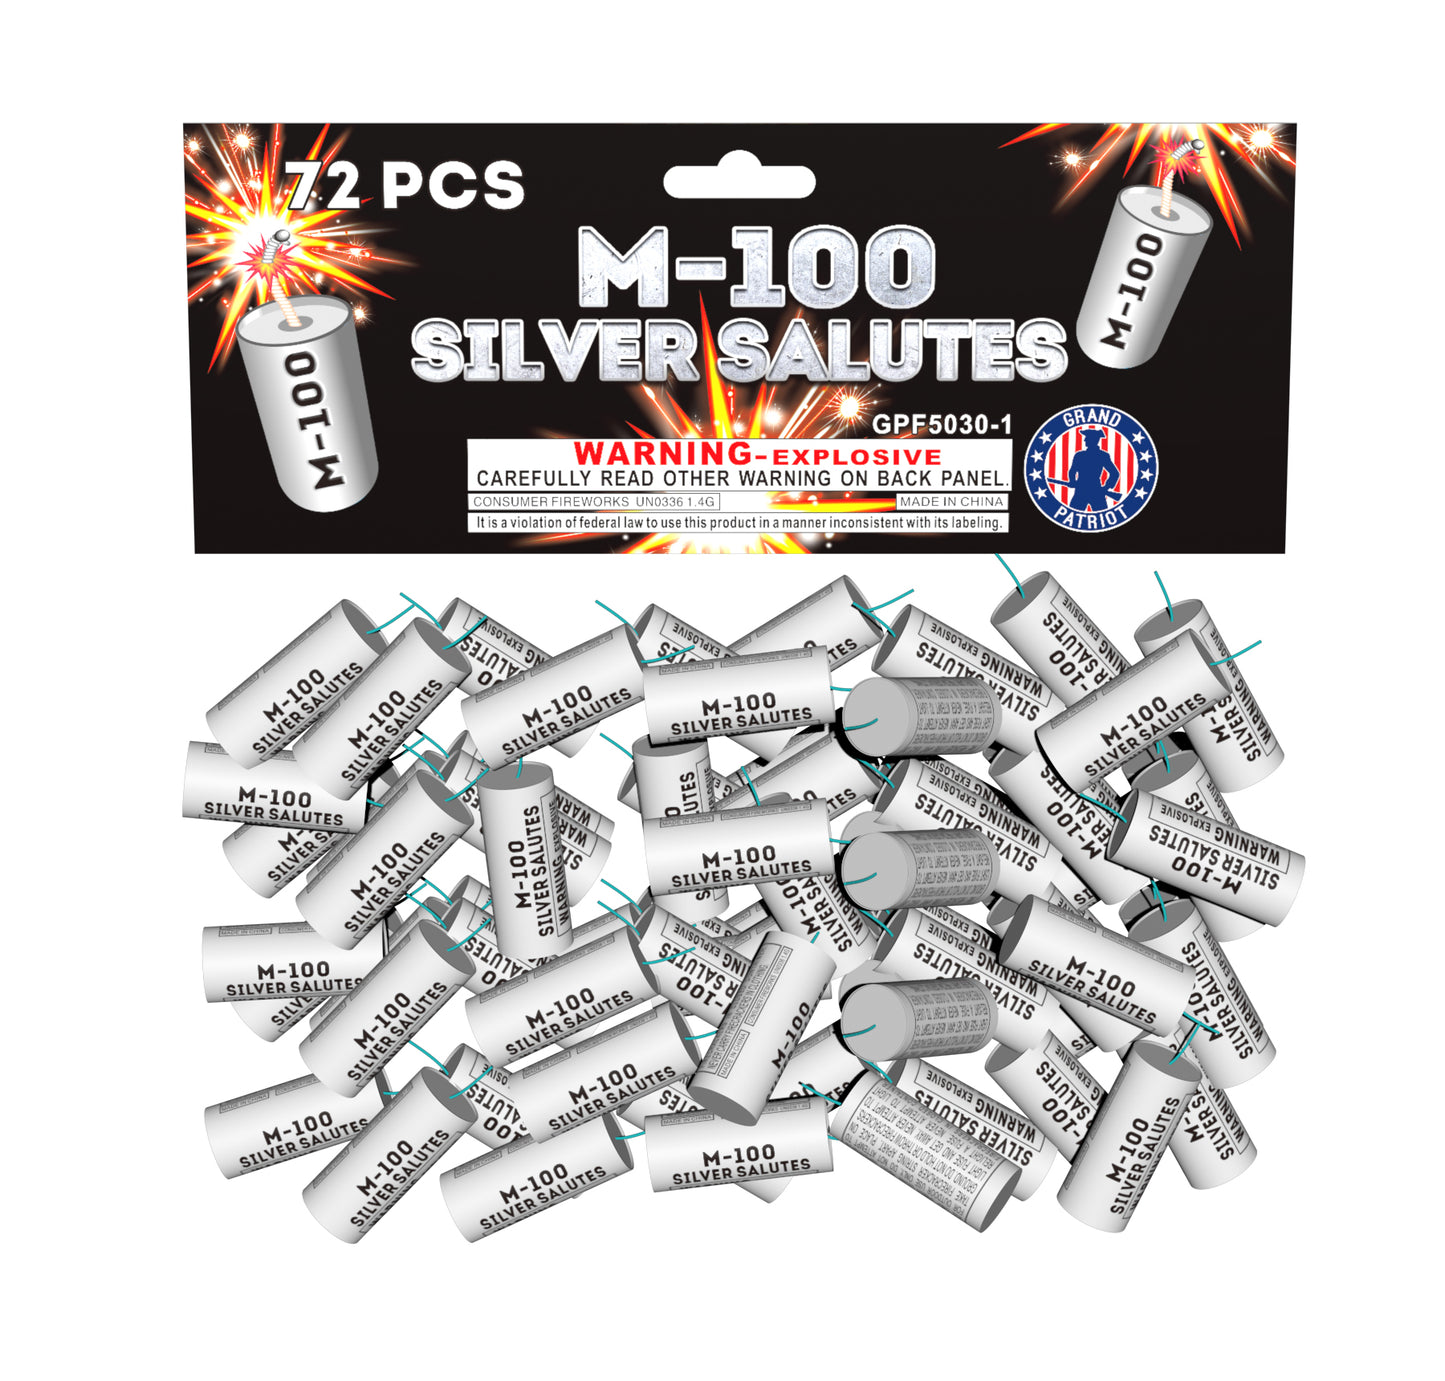 M-100 Silver Salutes (72 pack)